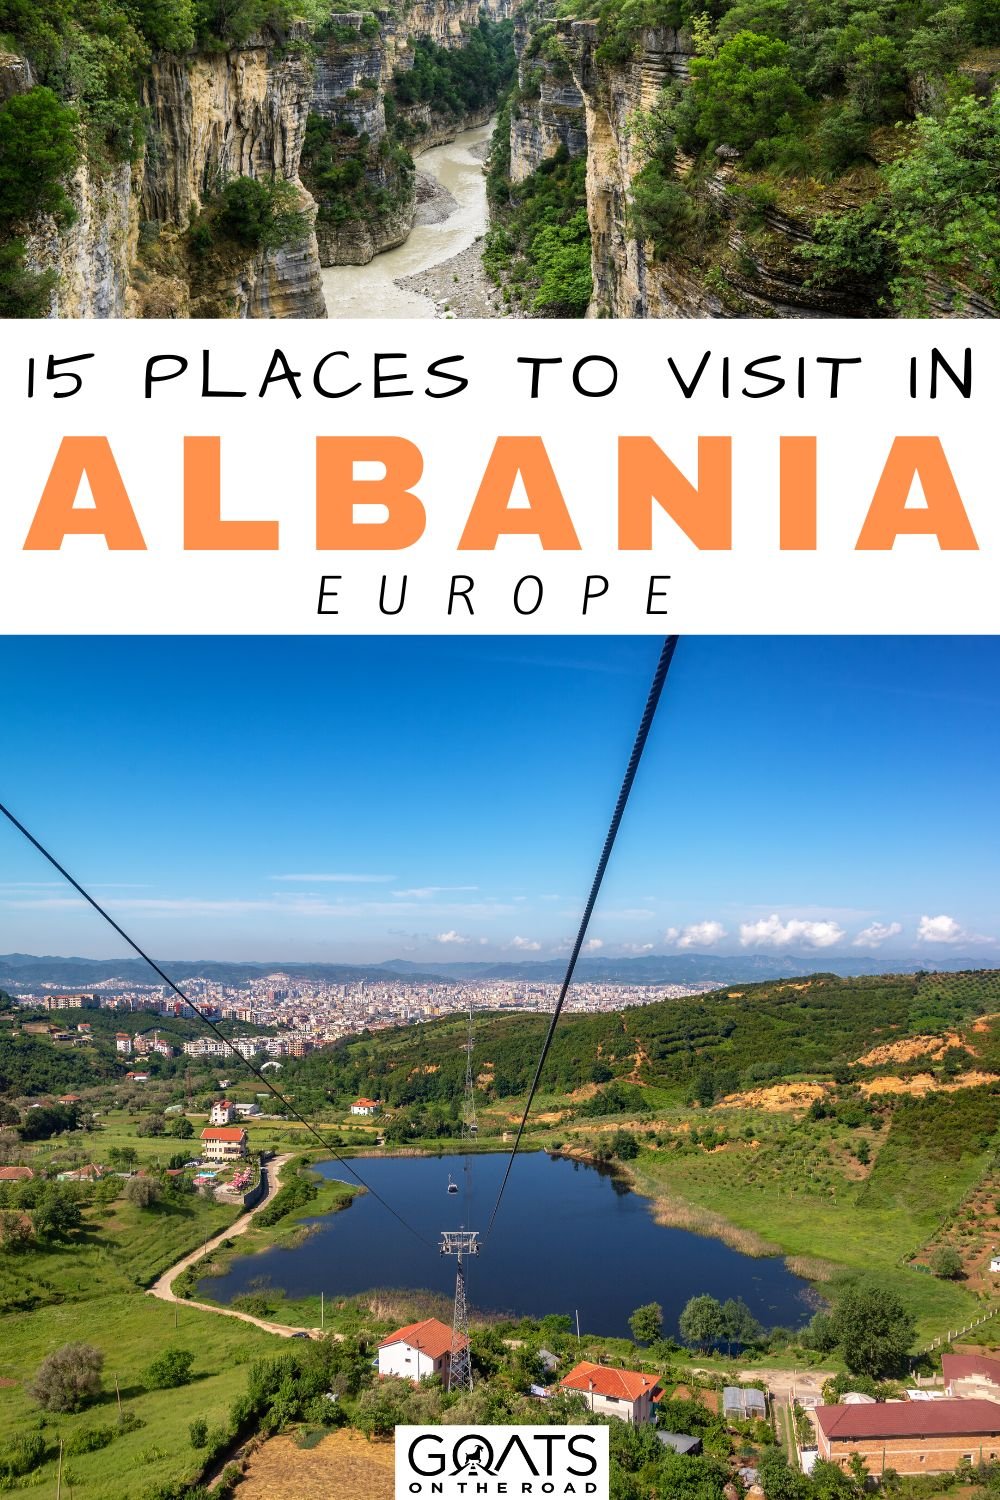 “15 Places To Visit in Albania